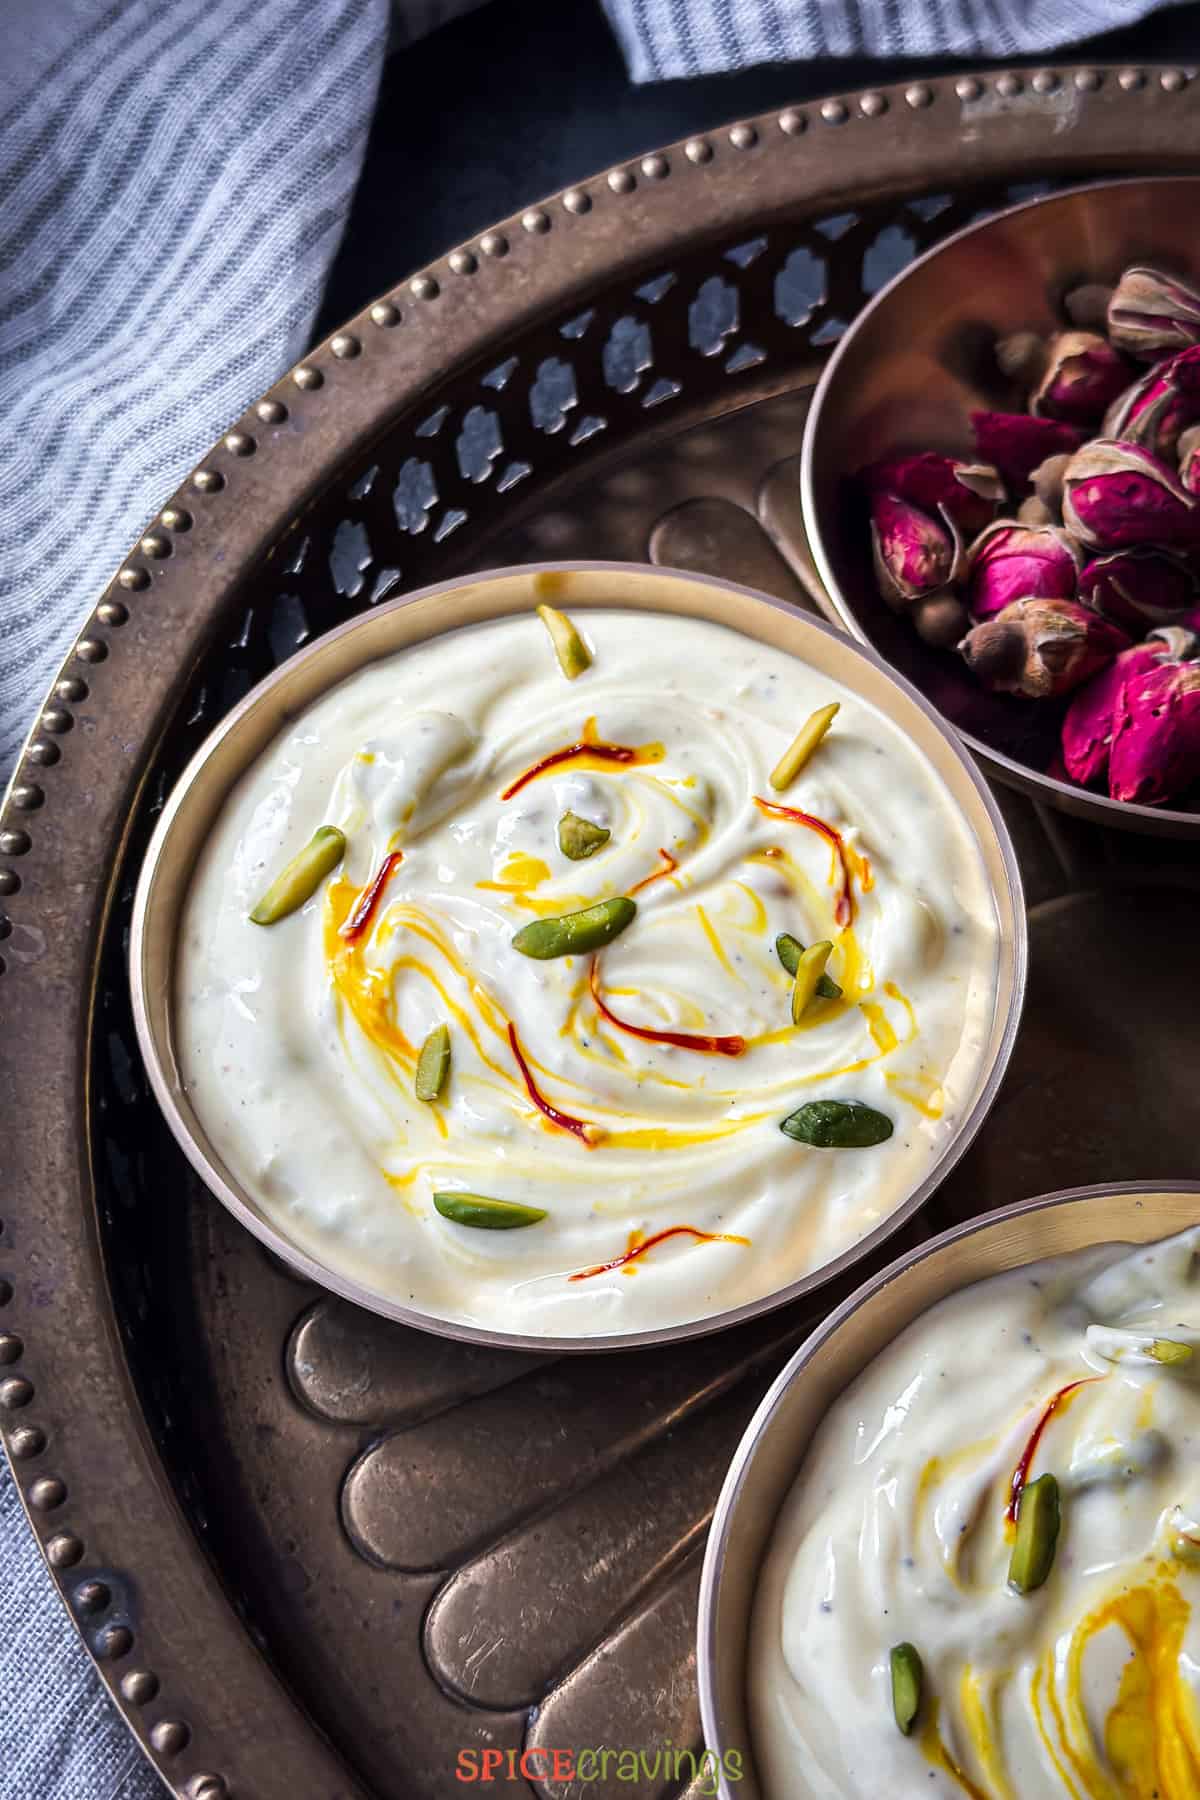 Shrikhand served in copper bowl garnished with saffron and pistachio